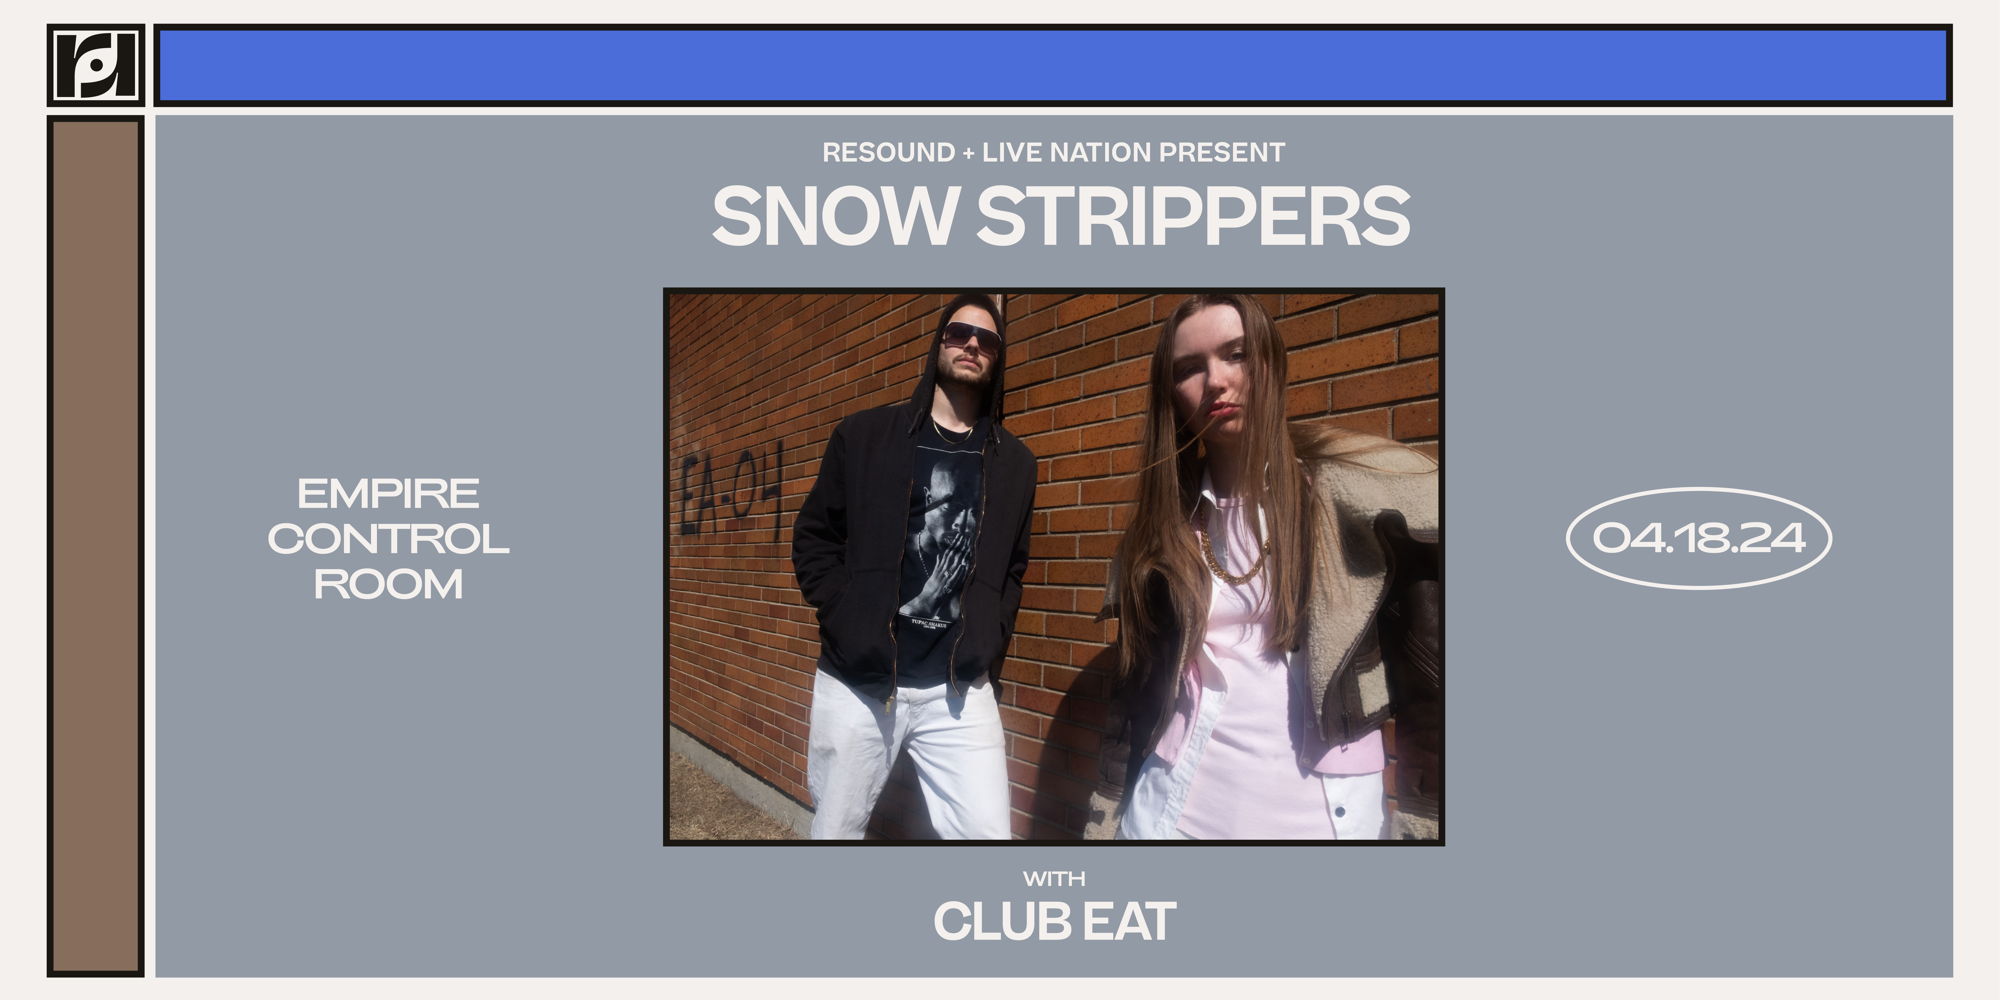 Live Nation & Resound Present: Snow Strippers w/ Club Eat at Empire Control Room promotional image